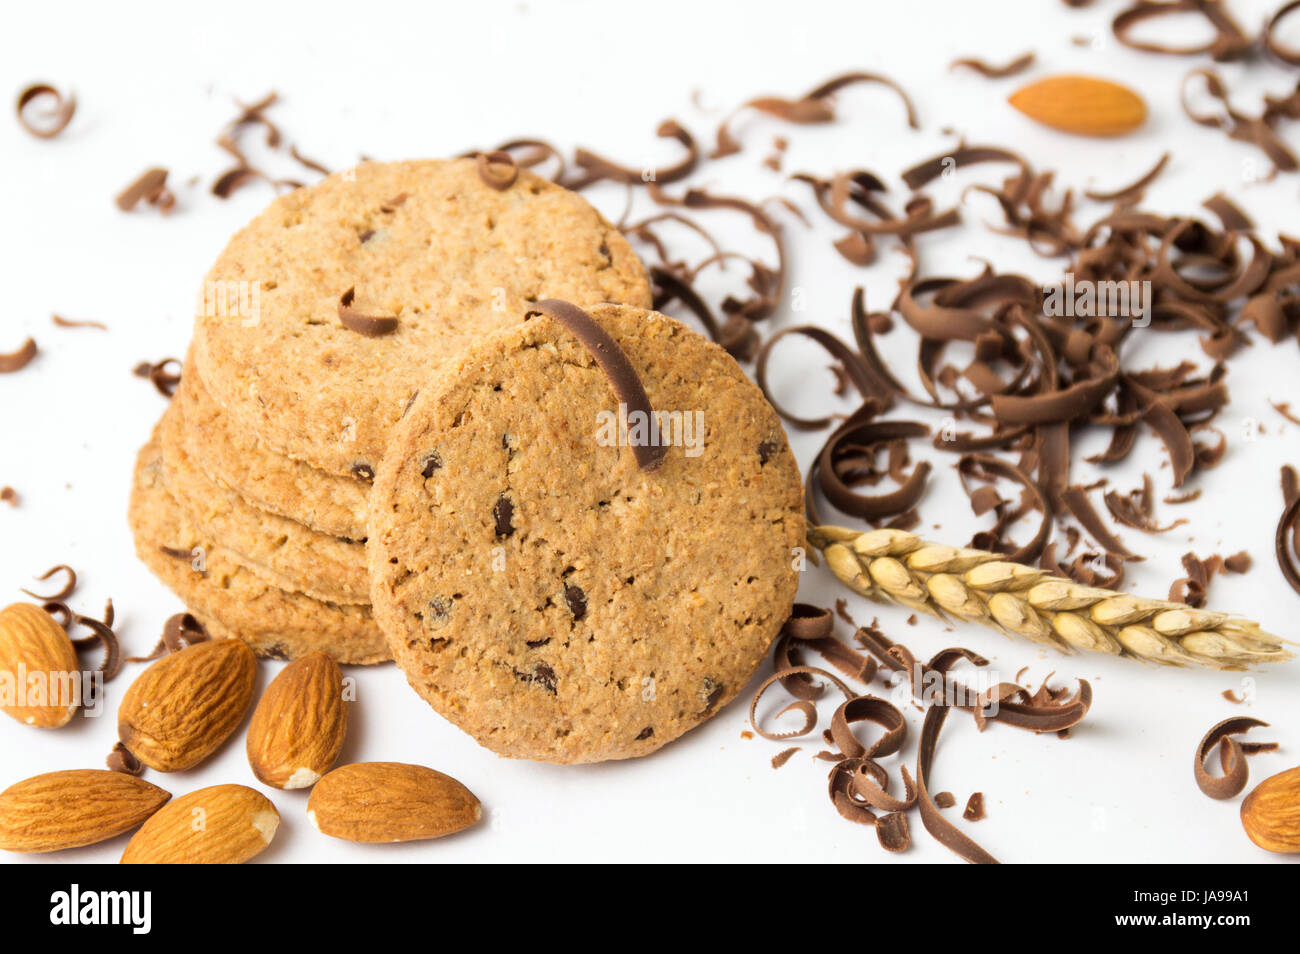 Integral cookies with almonds and chocolate pieces on white Stock Photo